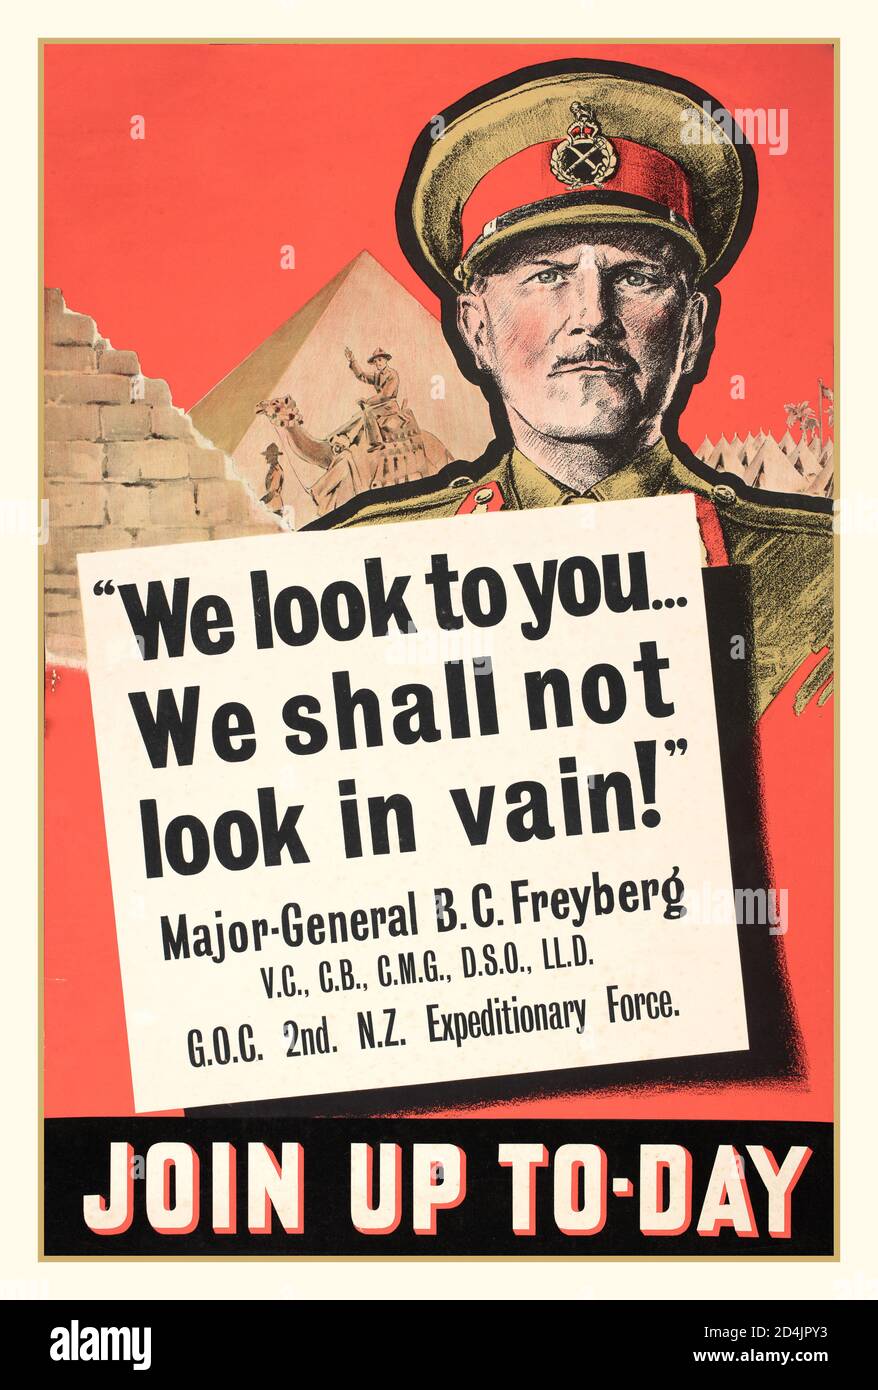 WW2 1940’s New Zealand recruitment poster produced during the Second World War. Image of Major-General Bernard C. Freyberg against a backdrop of Egyptian pyramids and a military camp, most likely Maadi Military Camp, Egypt.  'We look to you... We shall not look in vain! Major-General B.C. Freyberg, G.O.C. 2nd N.Z. Expeditionary Force. Join up to-day'. Wellington, N.Z. Stock Photo